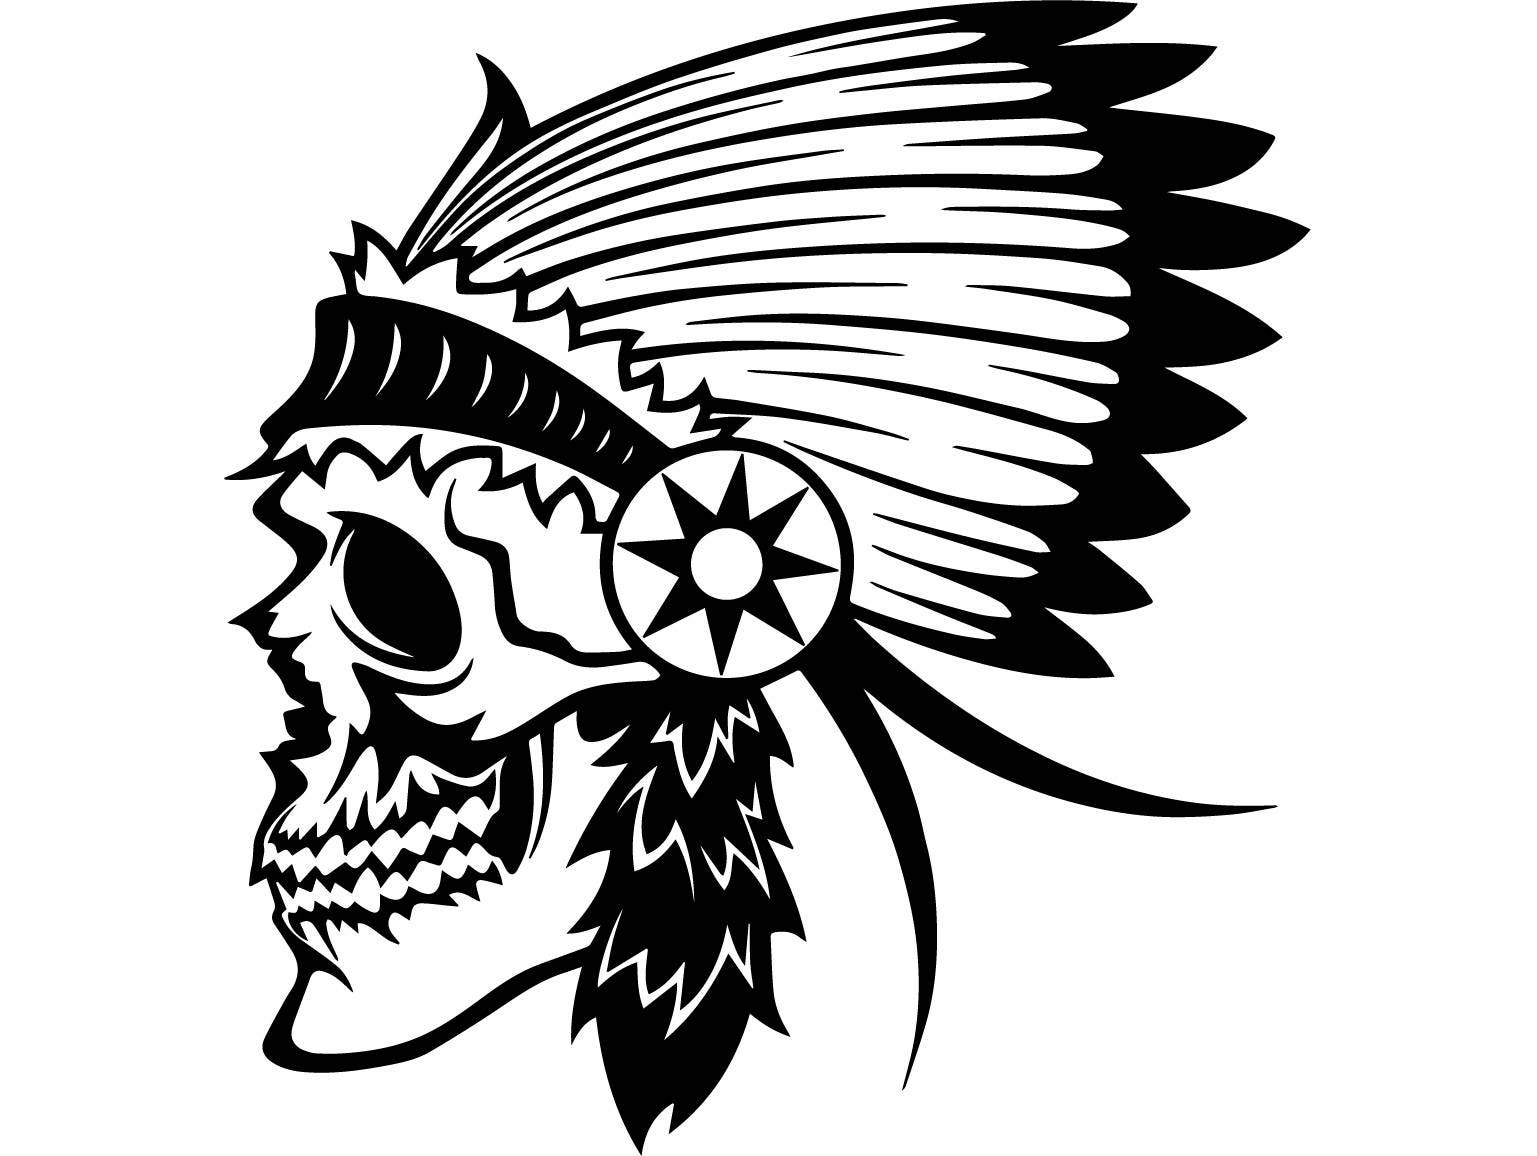 Download Indian Skull #2 Native American Warrior Headdress Feather ...